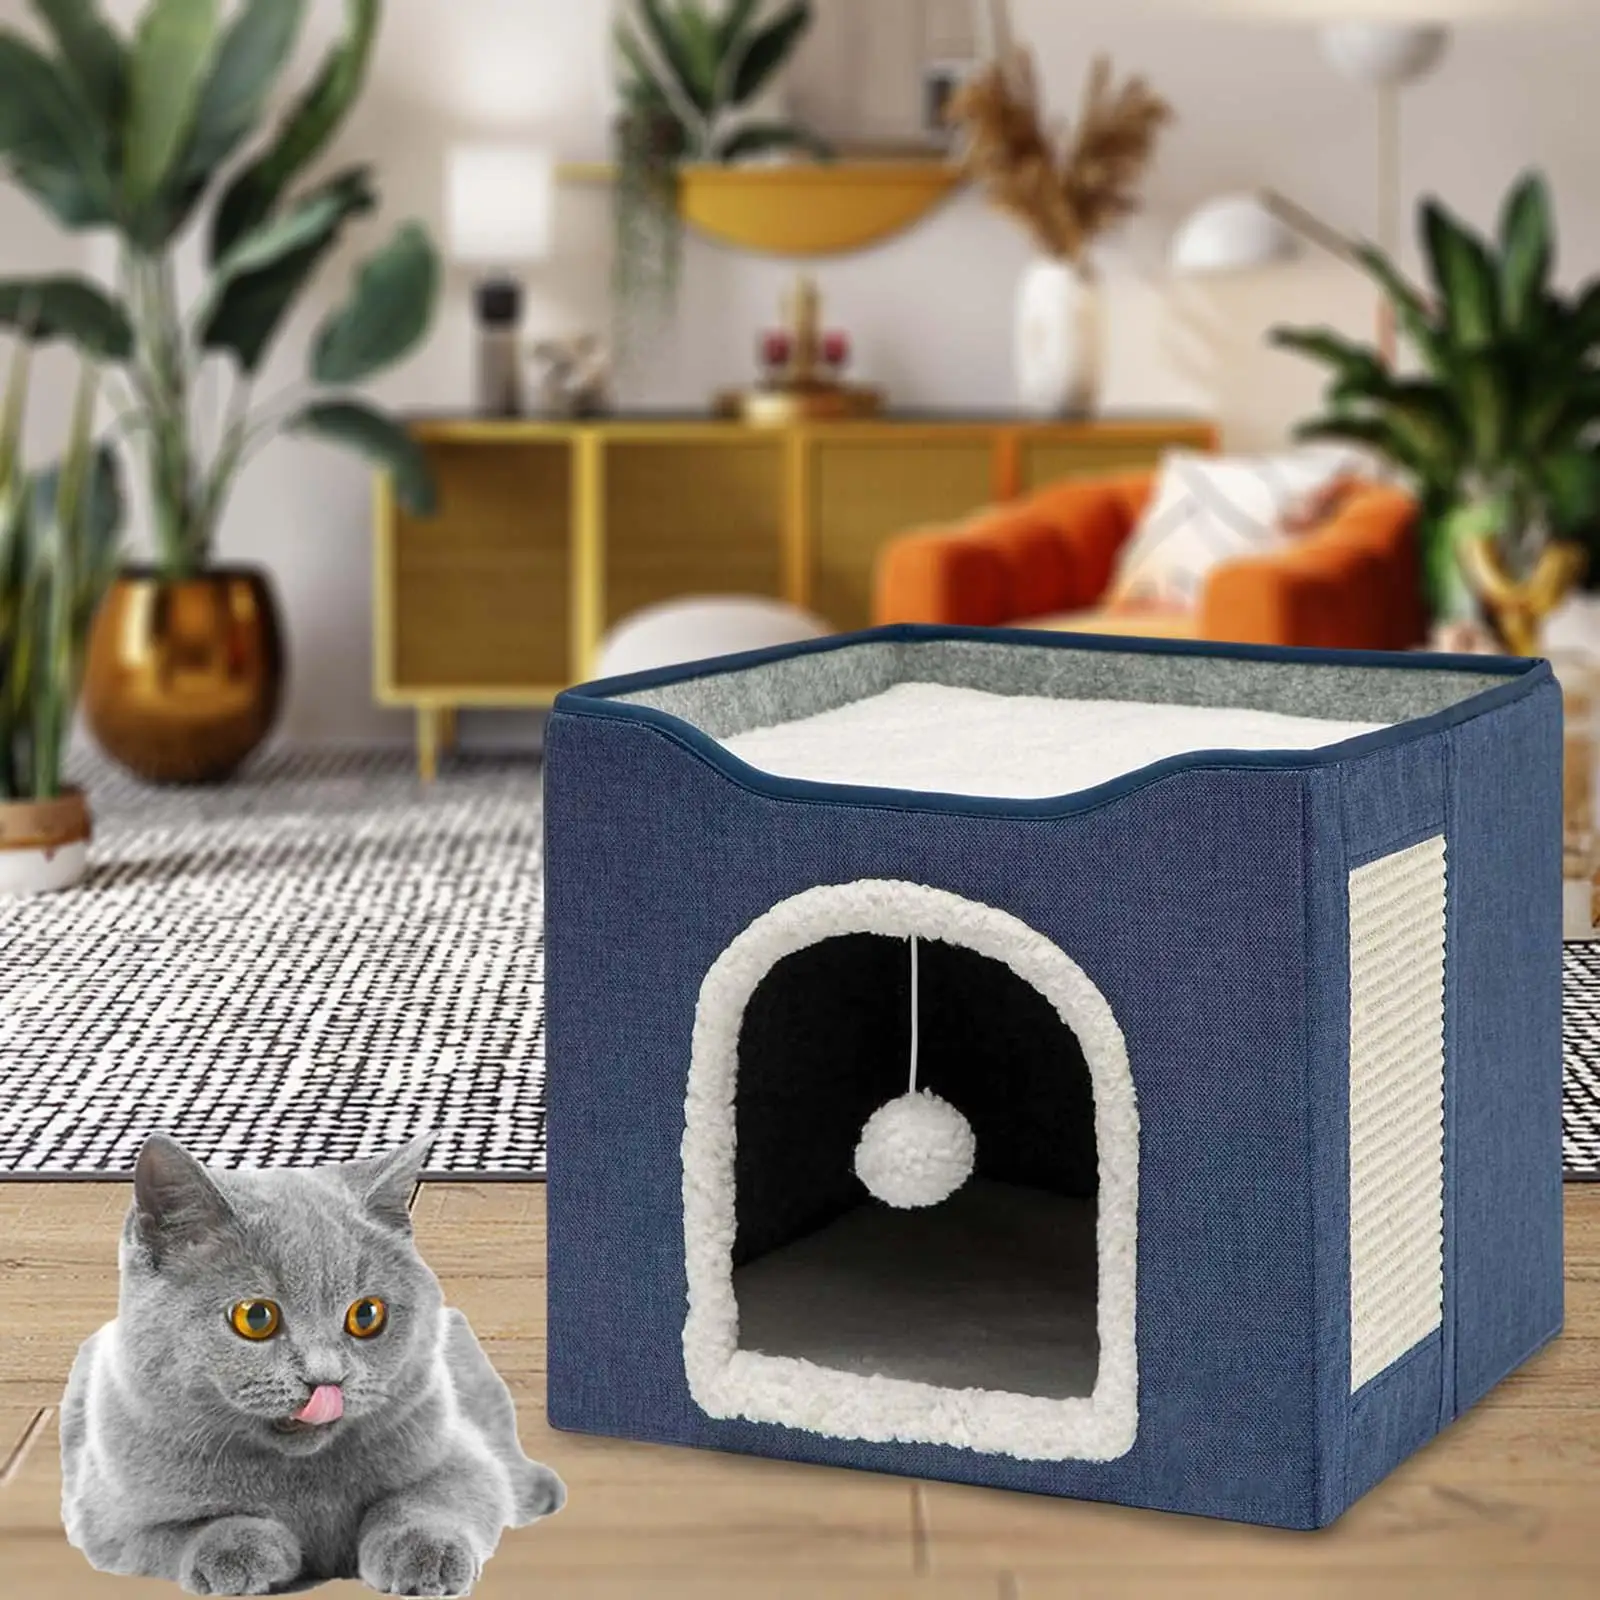 Foldable Pet Cat Bed, Interactive Play Toy Grind Claws, Kitten Cave Scratcher Pad Scratching Board Sleeping Bed for Indoor